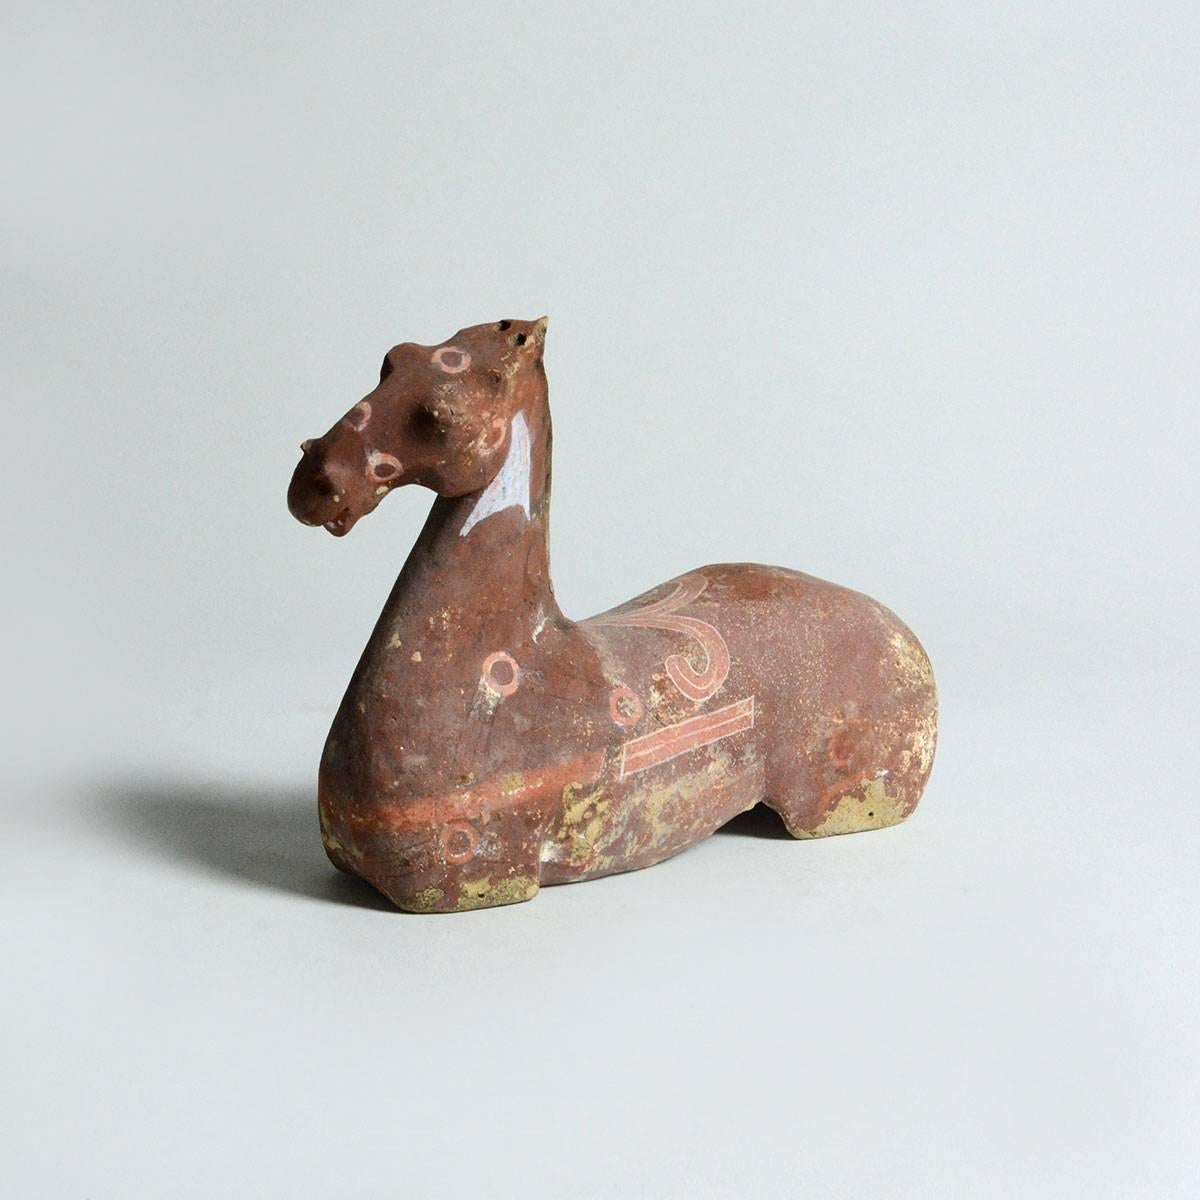 This pottery figurine is sculpted to show the strong, bold line and muscularity of the horse. Once part of an assembled set, this horse bears the characteristics associated with the famed Heavenly Horse of Fergana. Its long muscular neck, arched